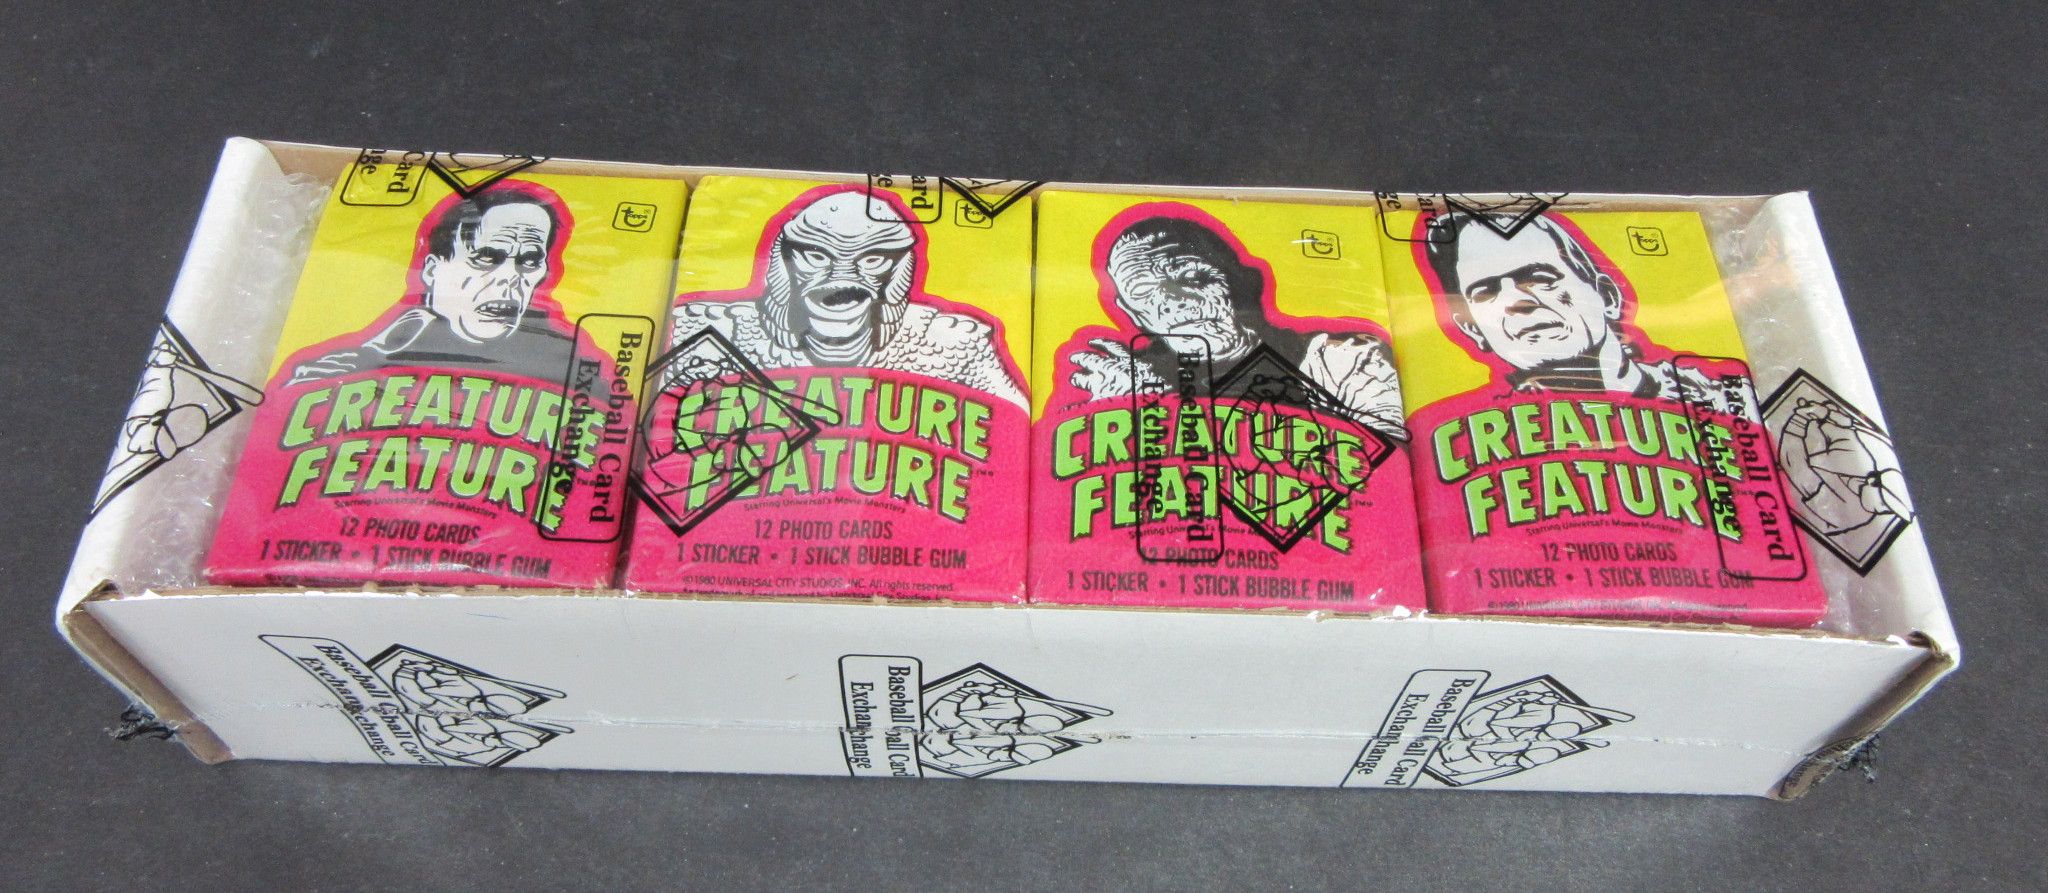 1980 Topps You'll Die Laughing (Creature Feature) Unopened Wax Packs (Lot of 36) (BBCE)